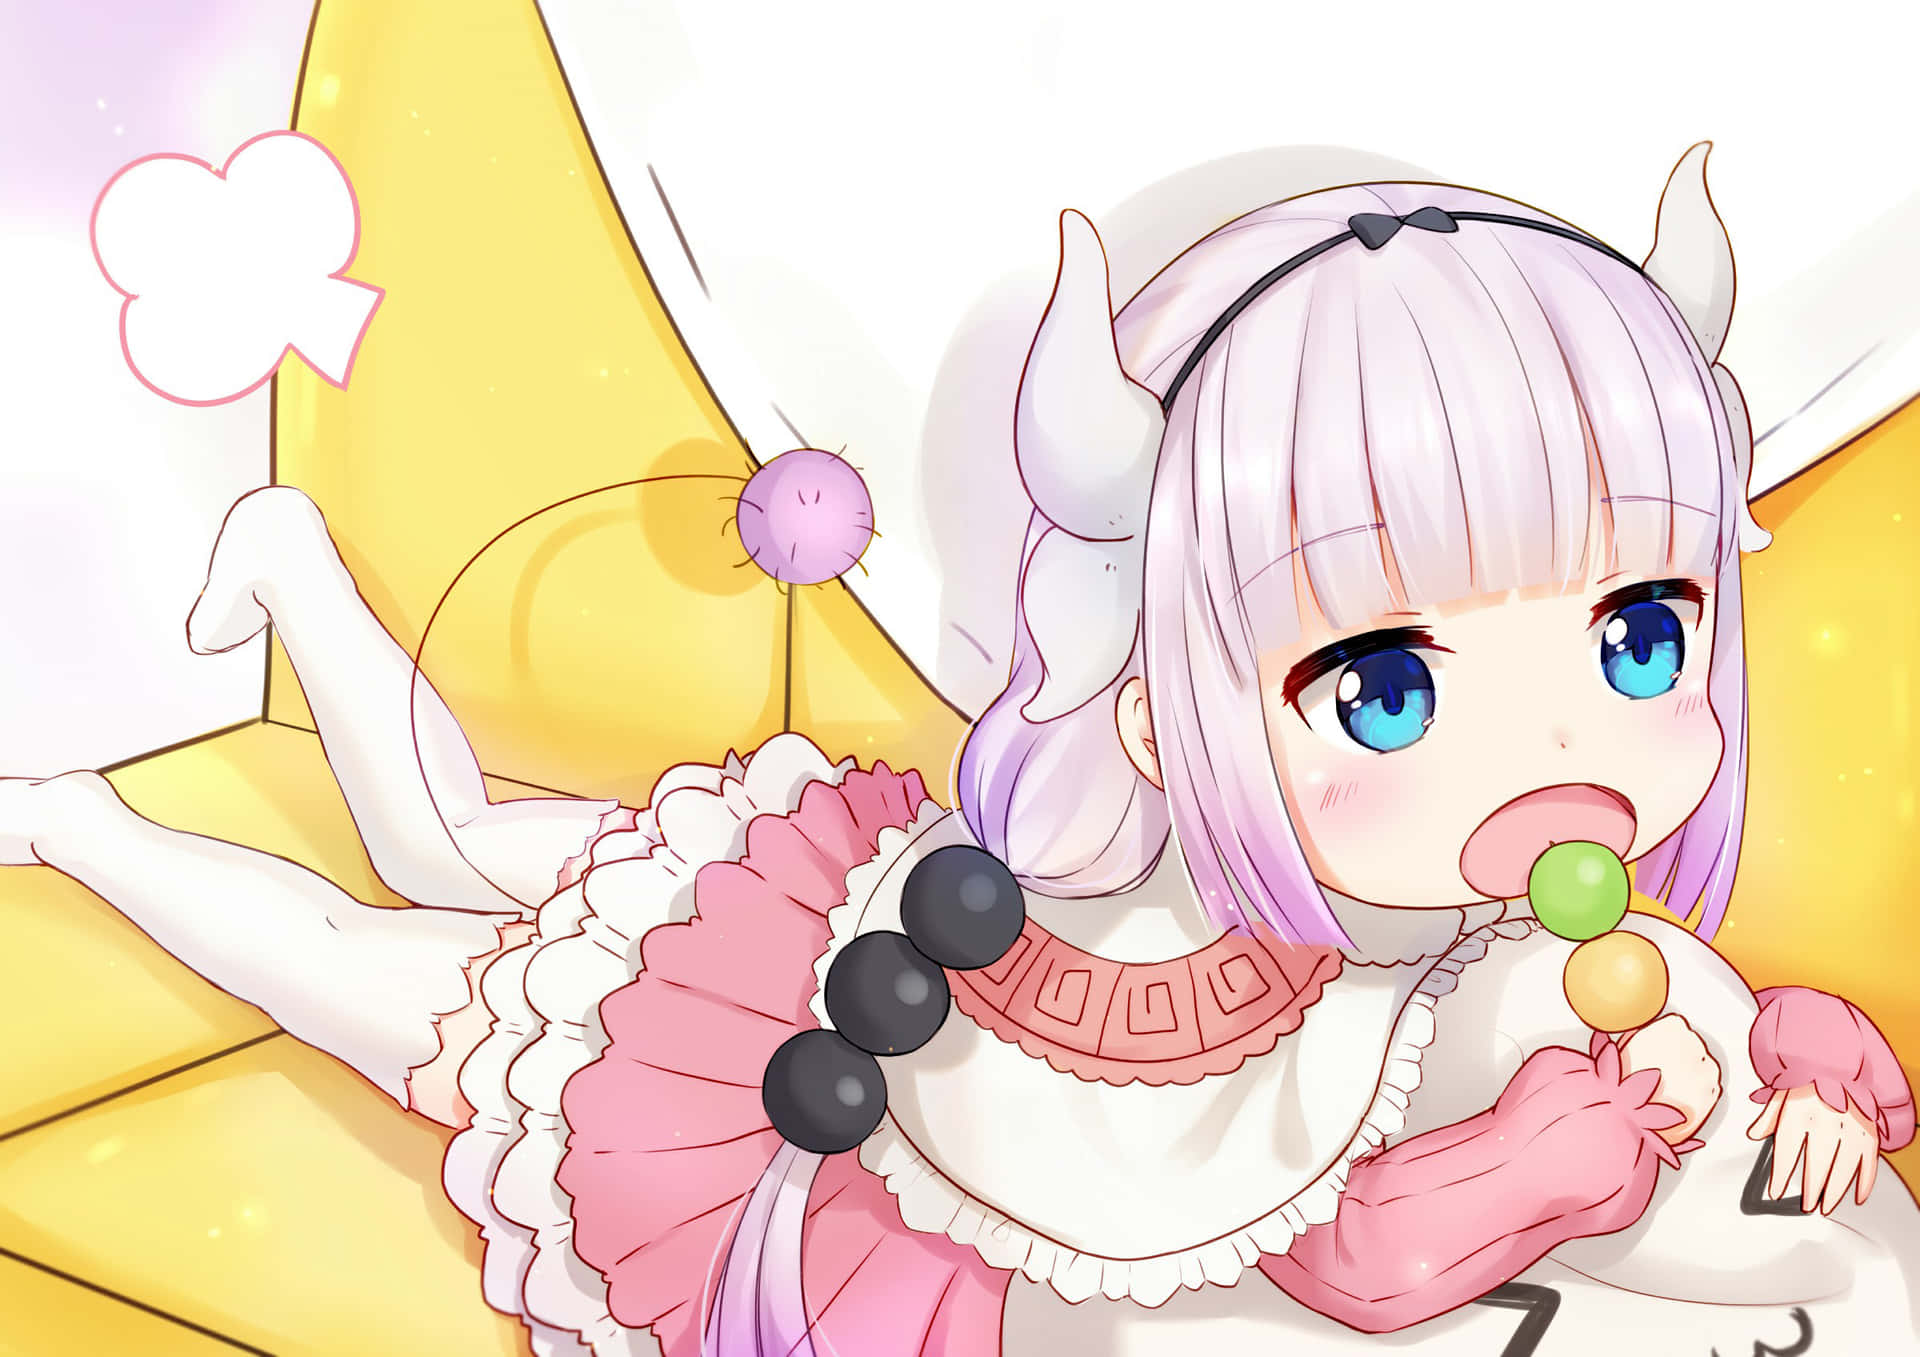 "What could Kanna Kamui be up to today?" Wallpaper